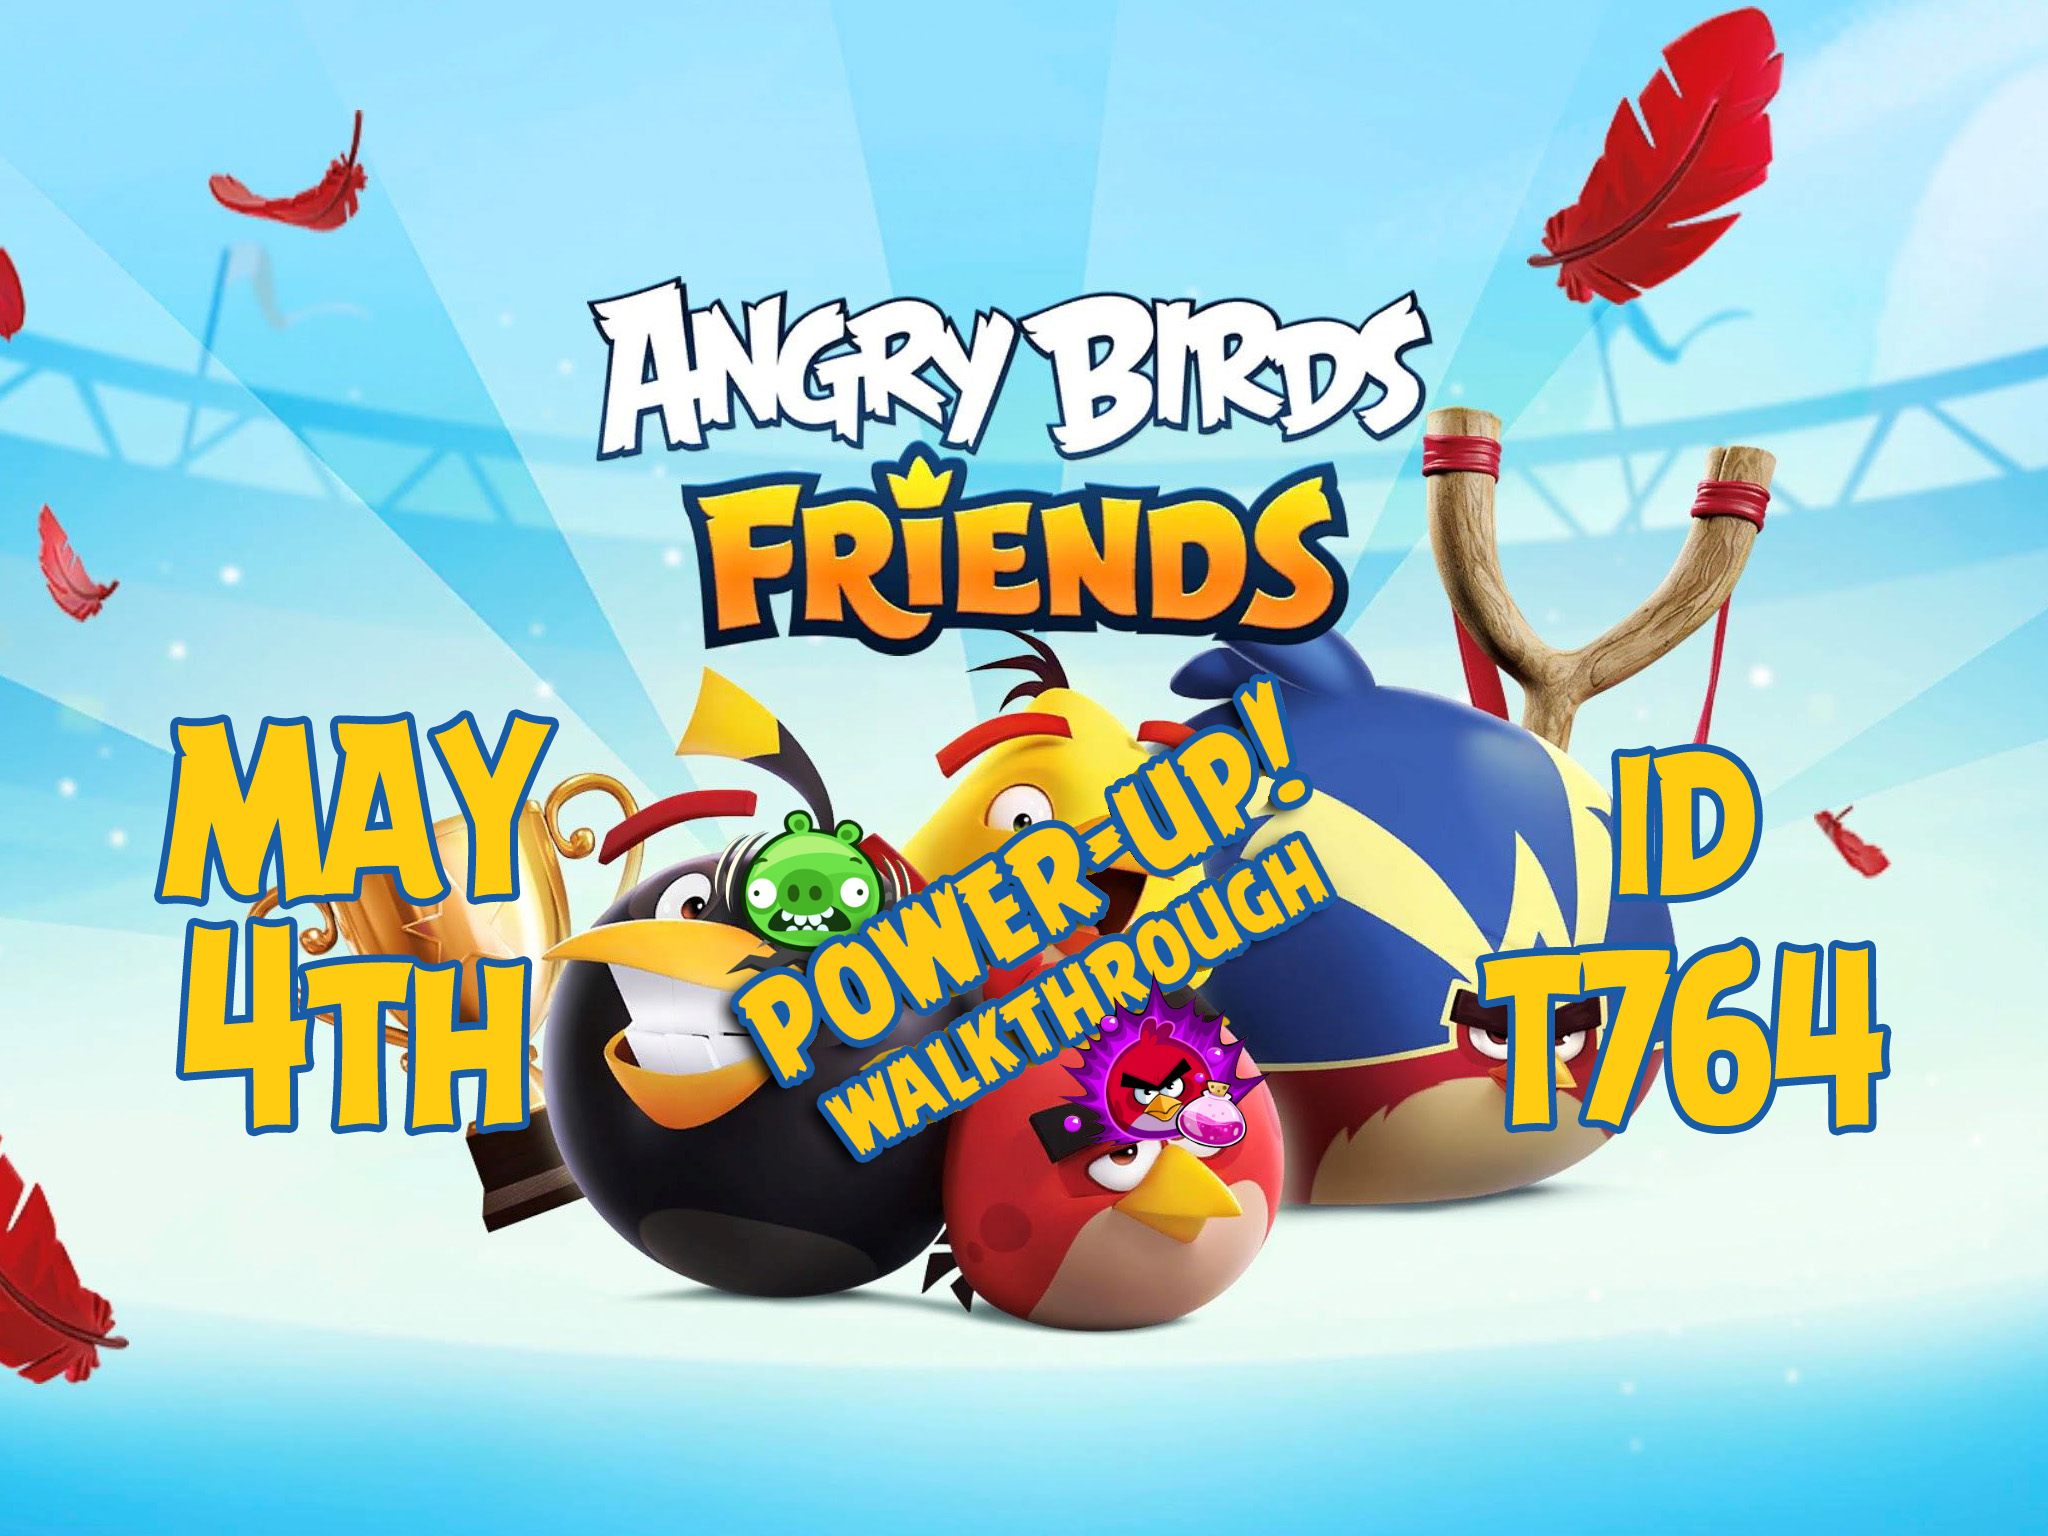 Angry-Birds-Friends-Tournament-T764-Feature-Image-PU